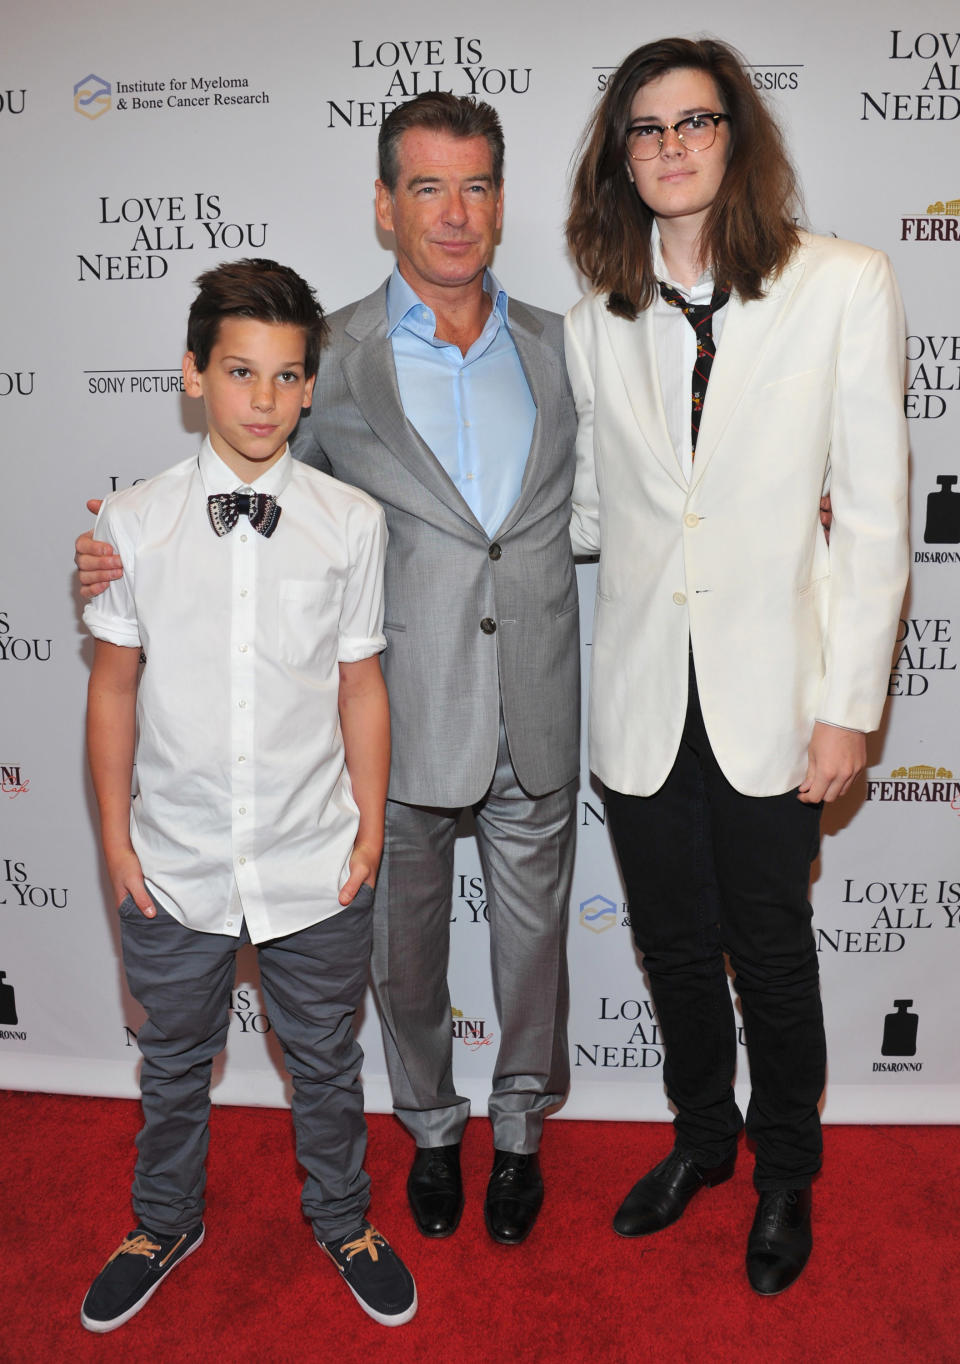 Pierce Brosnan with his sons on the red carpet